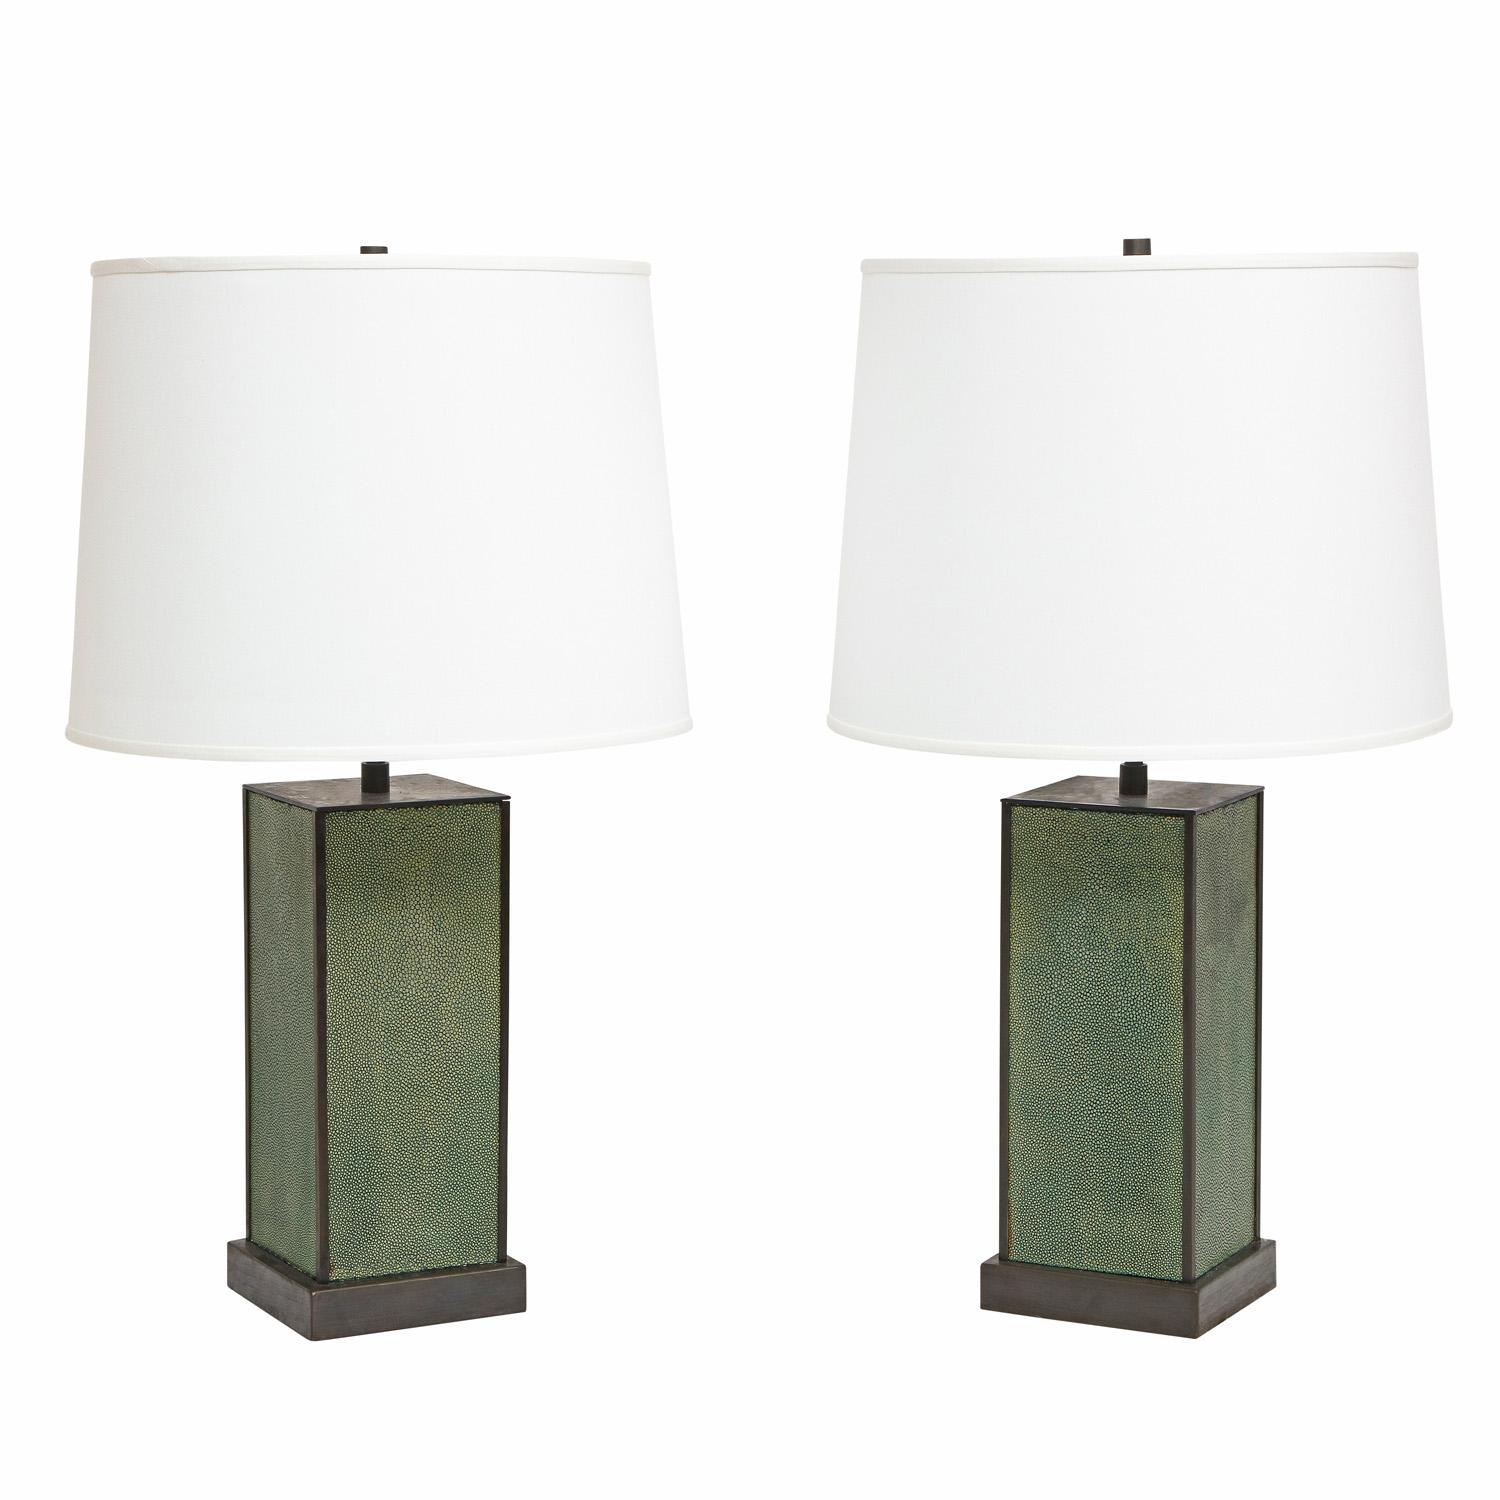 Pair of exceptional table lamps in green shagreen and bronze by Karl Springer, American 1980's All 4 sides are covered in shagreen. Meticulous craftsmanship and the finest materials are hallmarks of Karl Springer’s designs.

Measures: shade